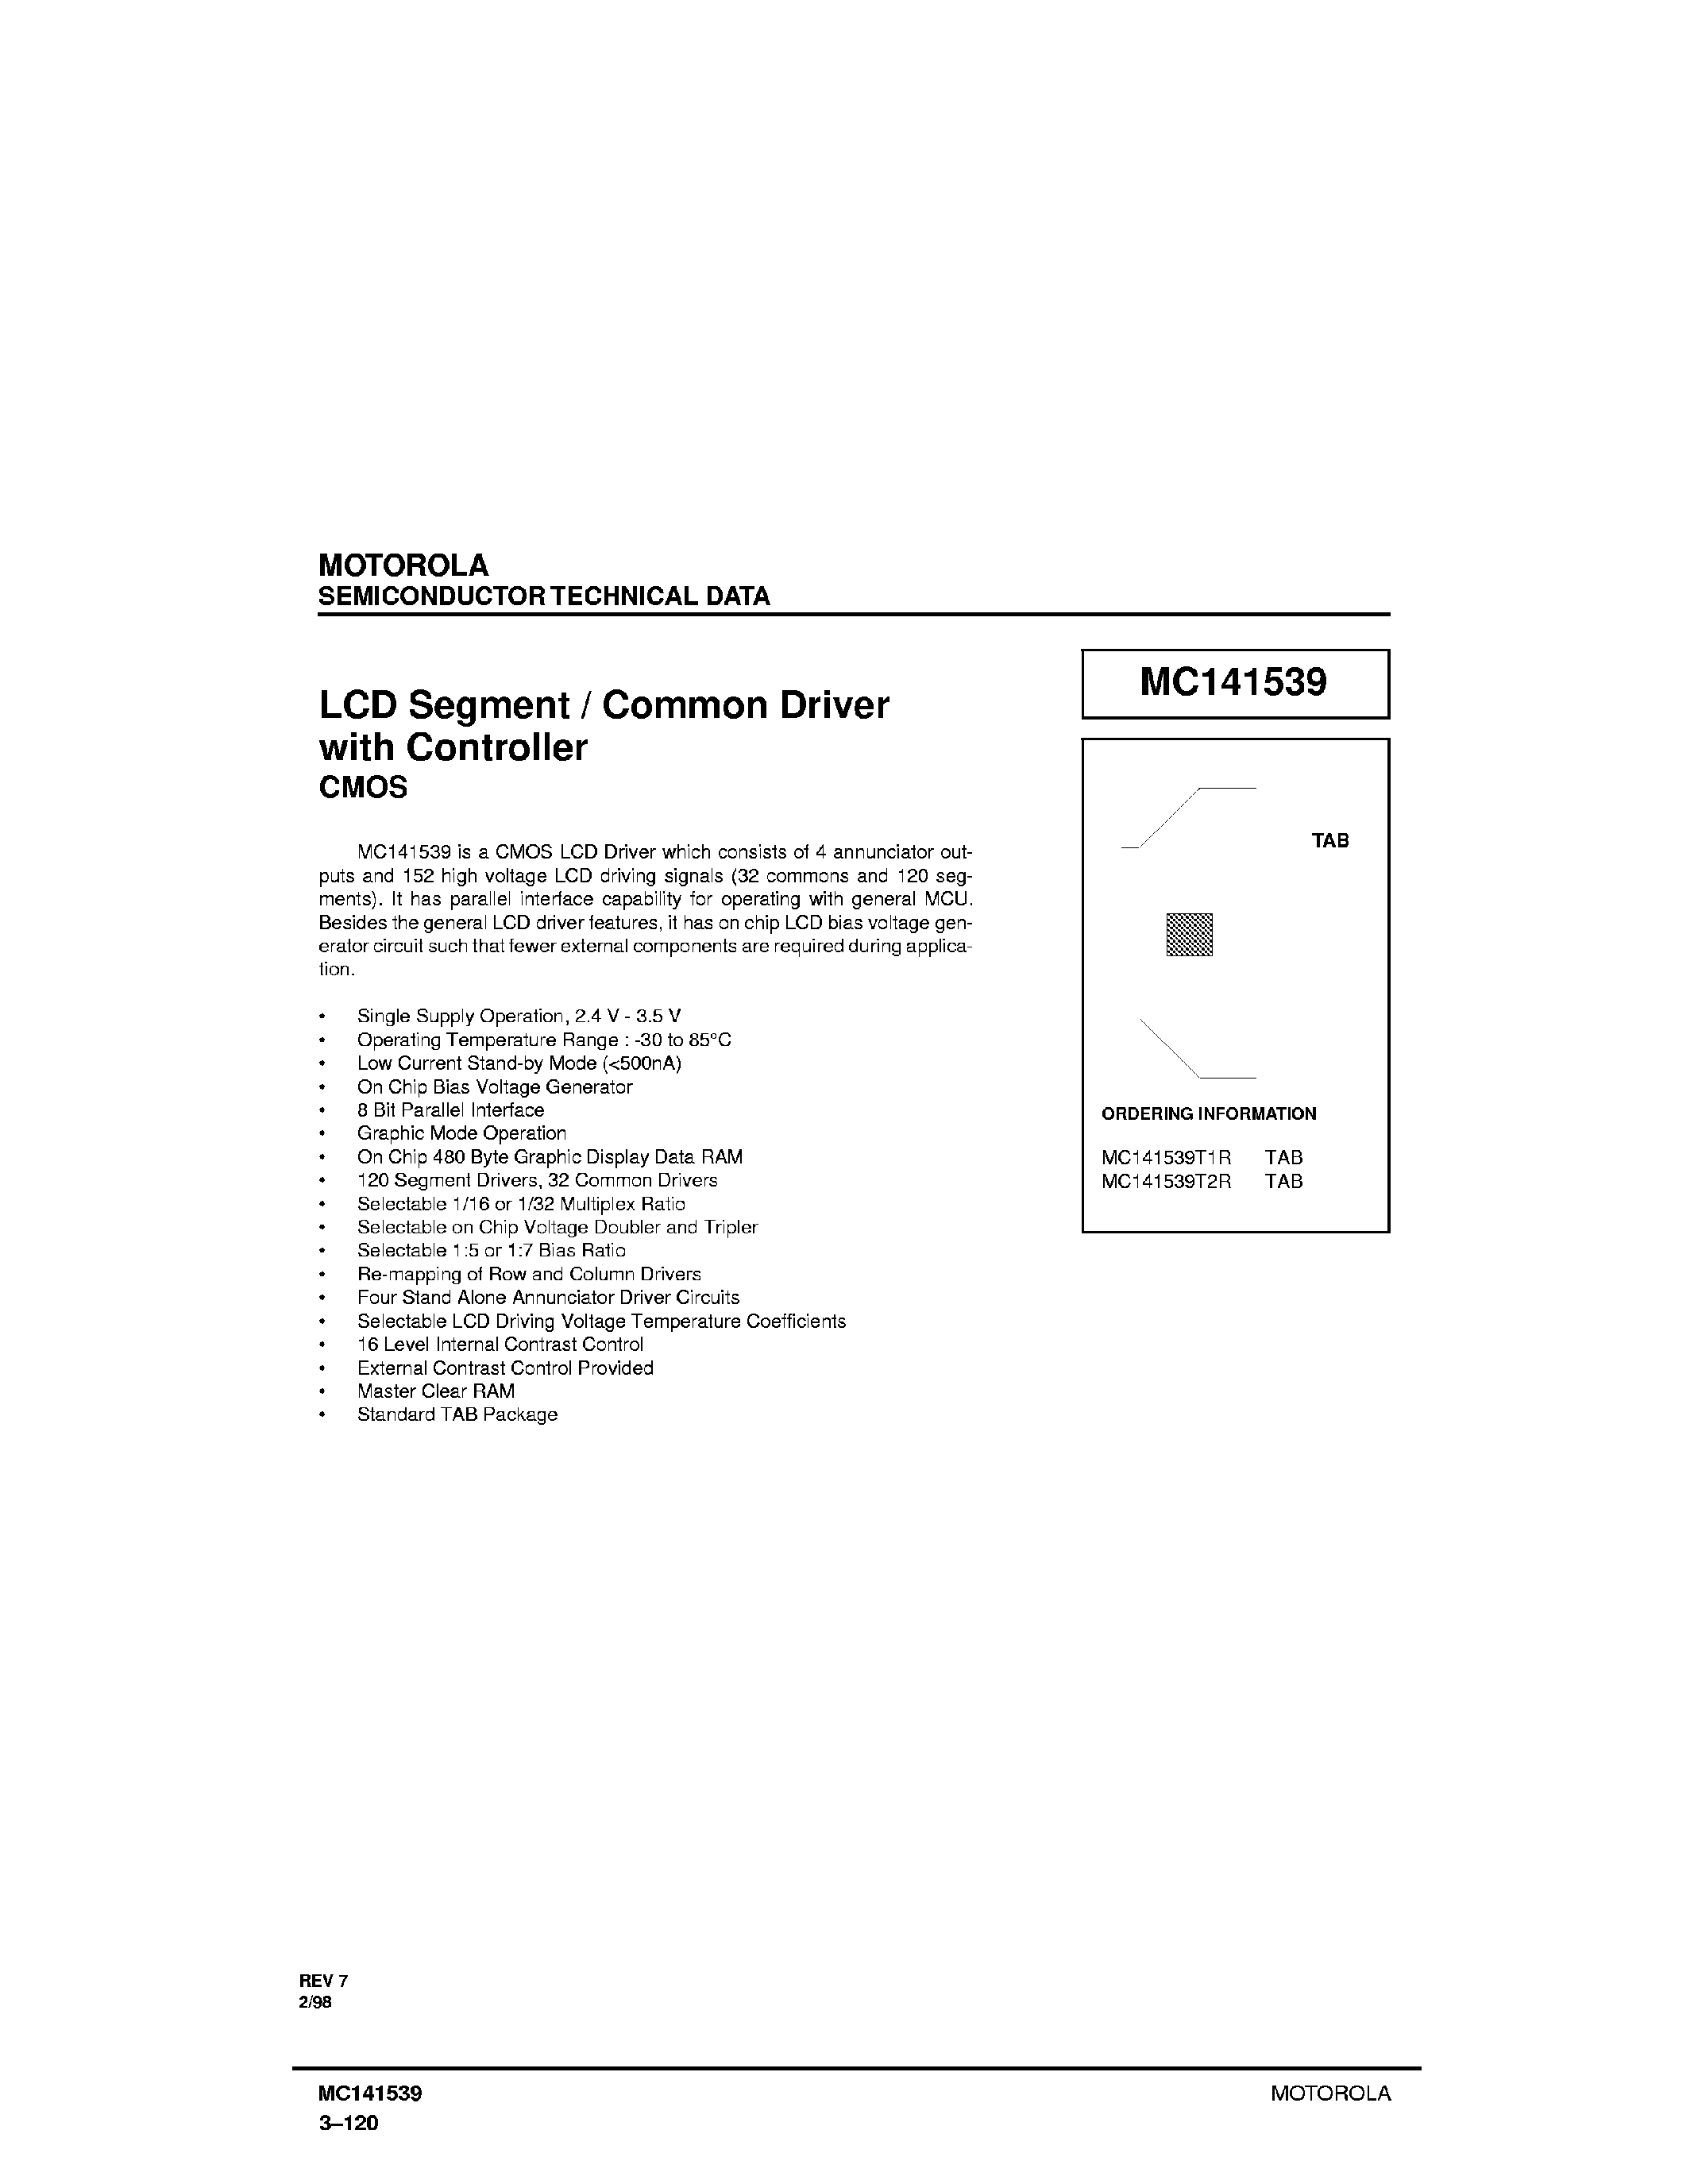 Даташит MC141539T1R - LCD Segment / Common Driver with Controller CMOS страница 1